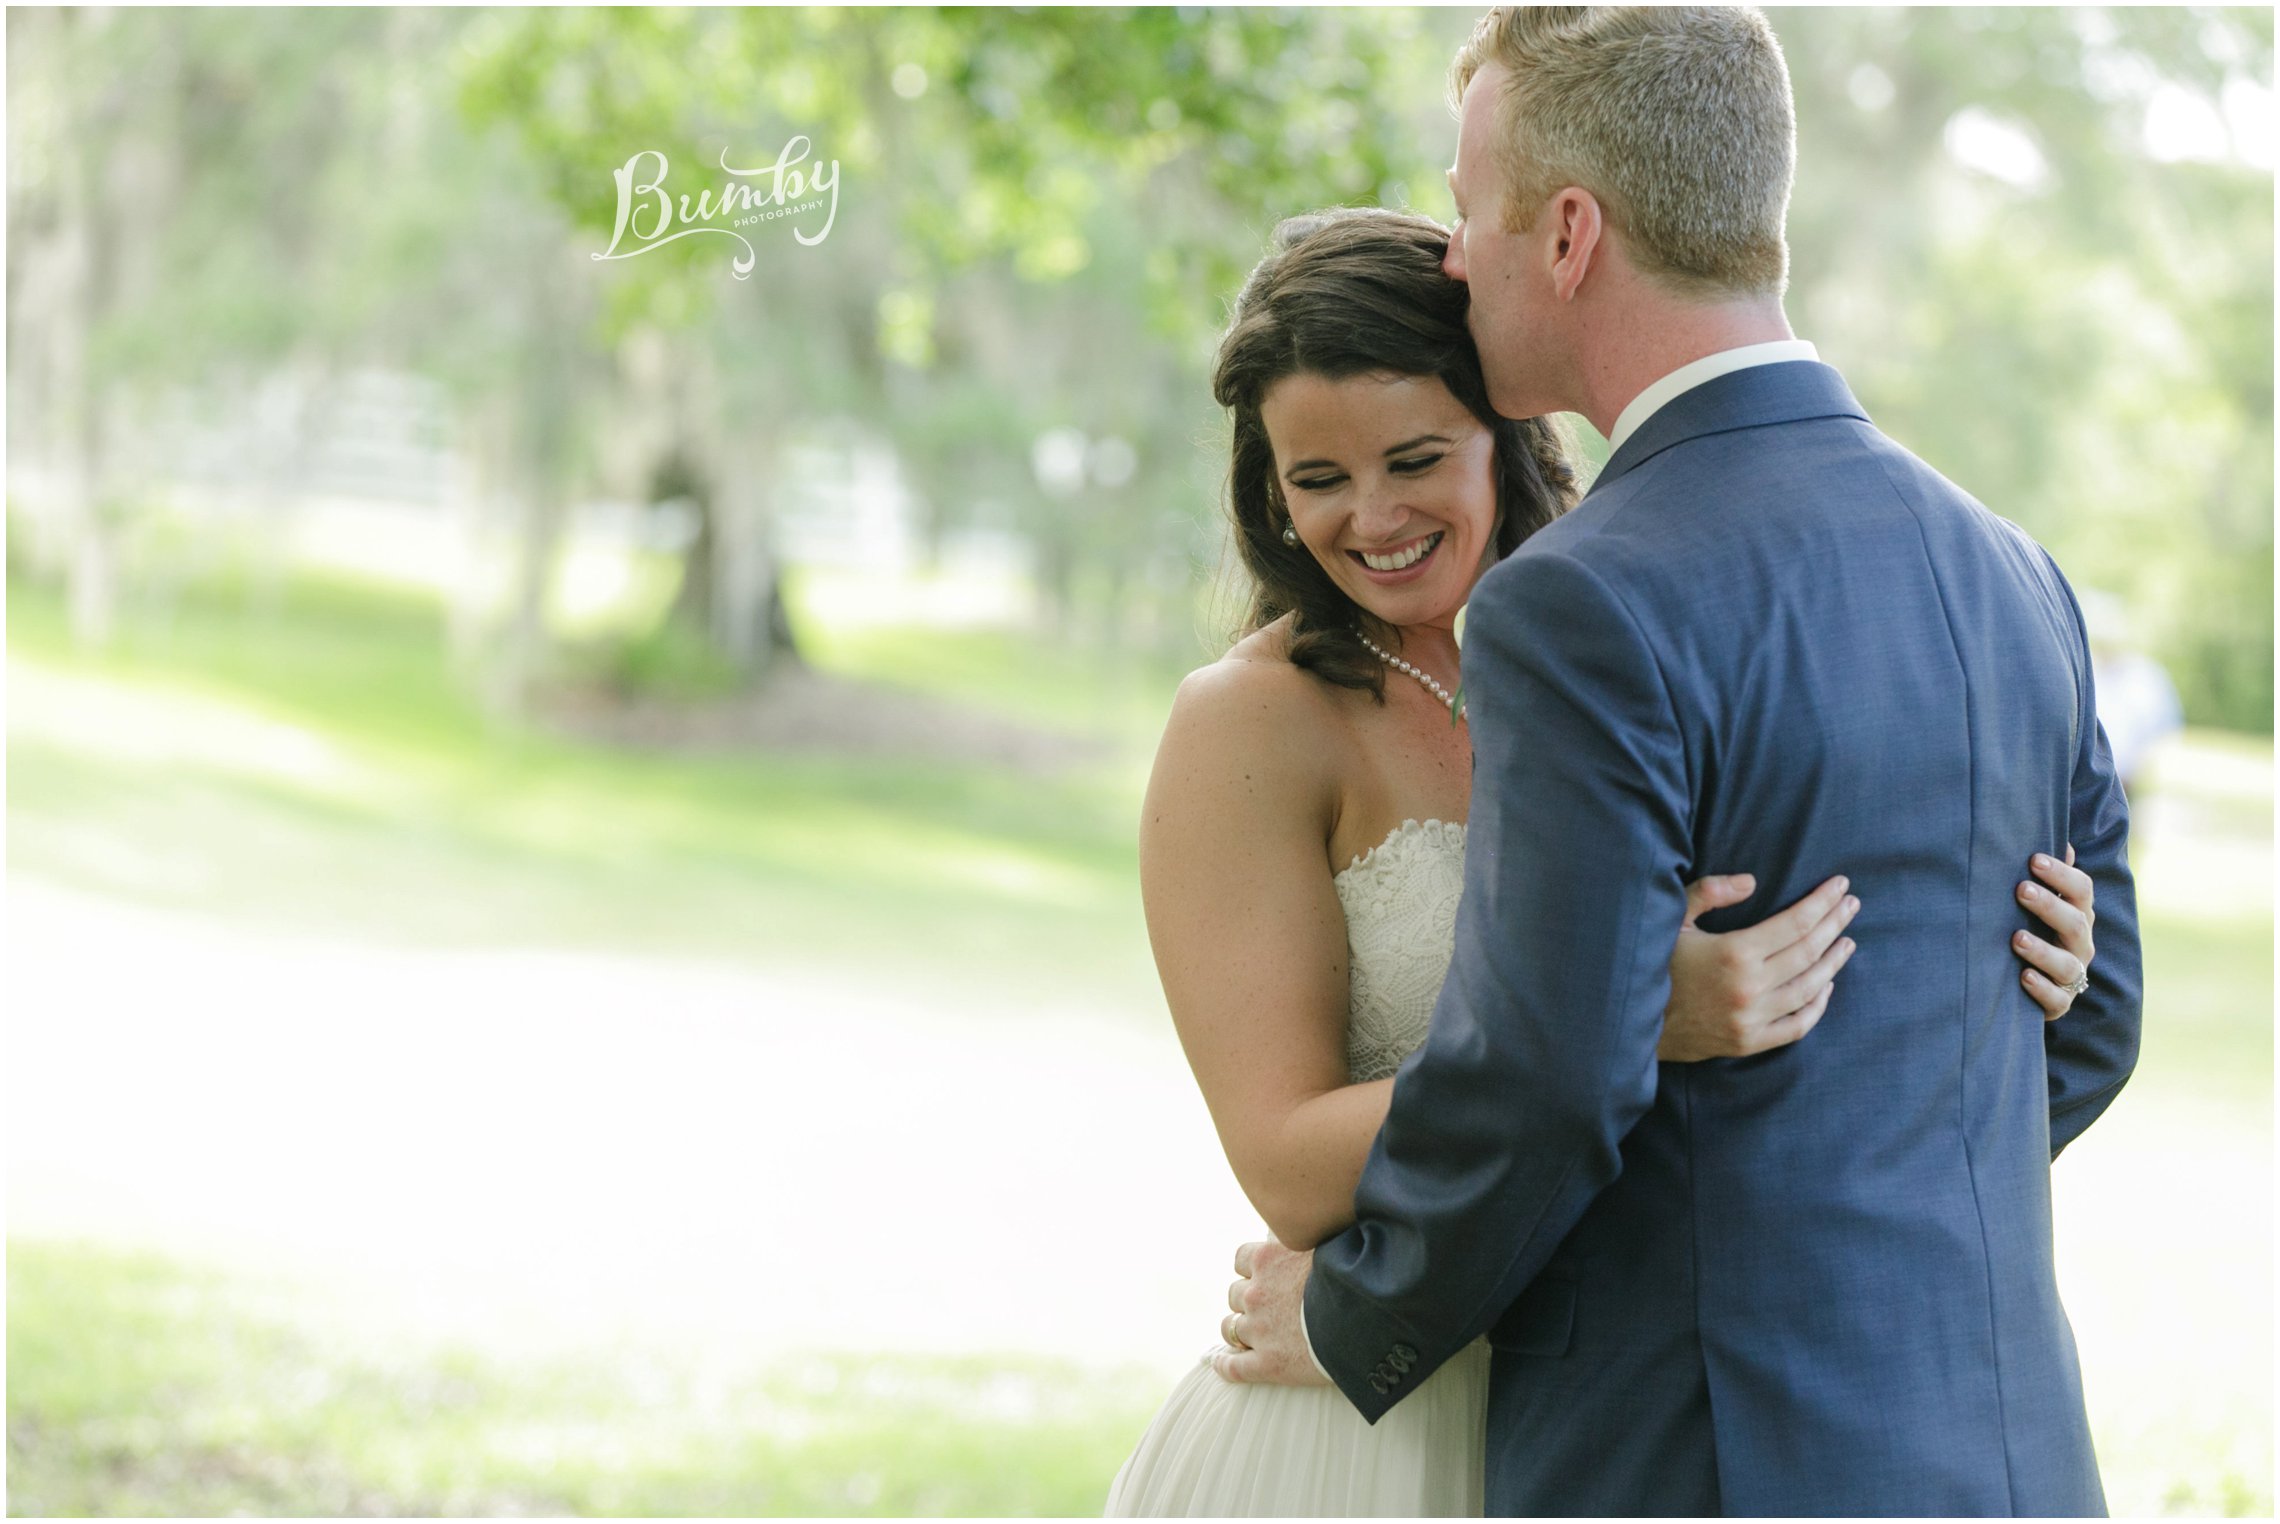 Up The Creek Farms Wedding | Bumby Photography